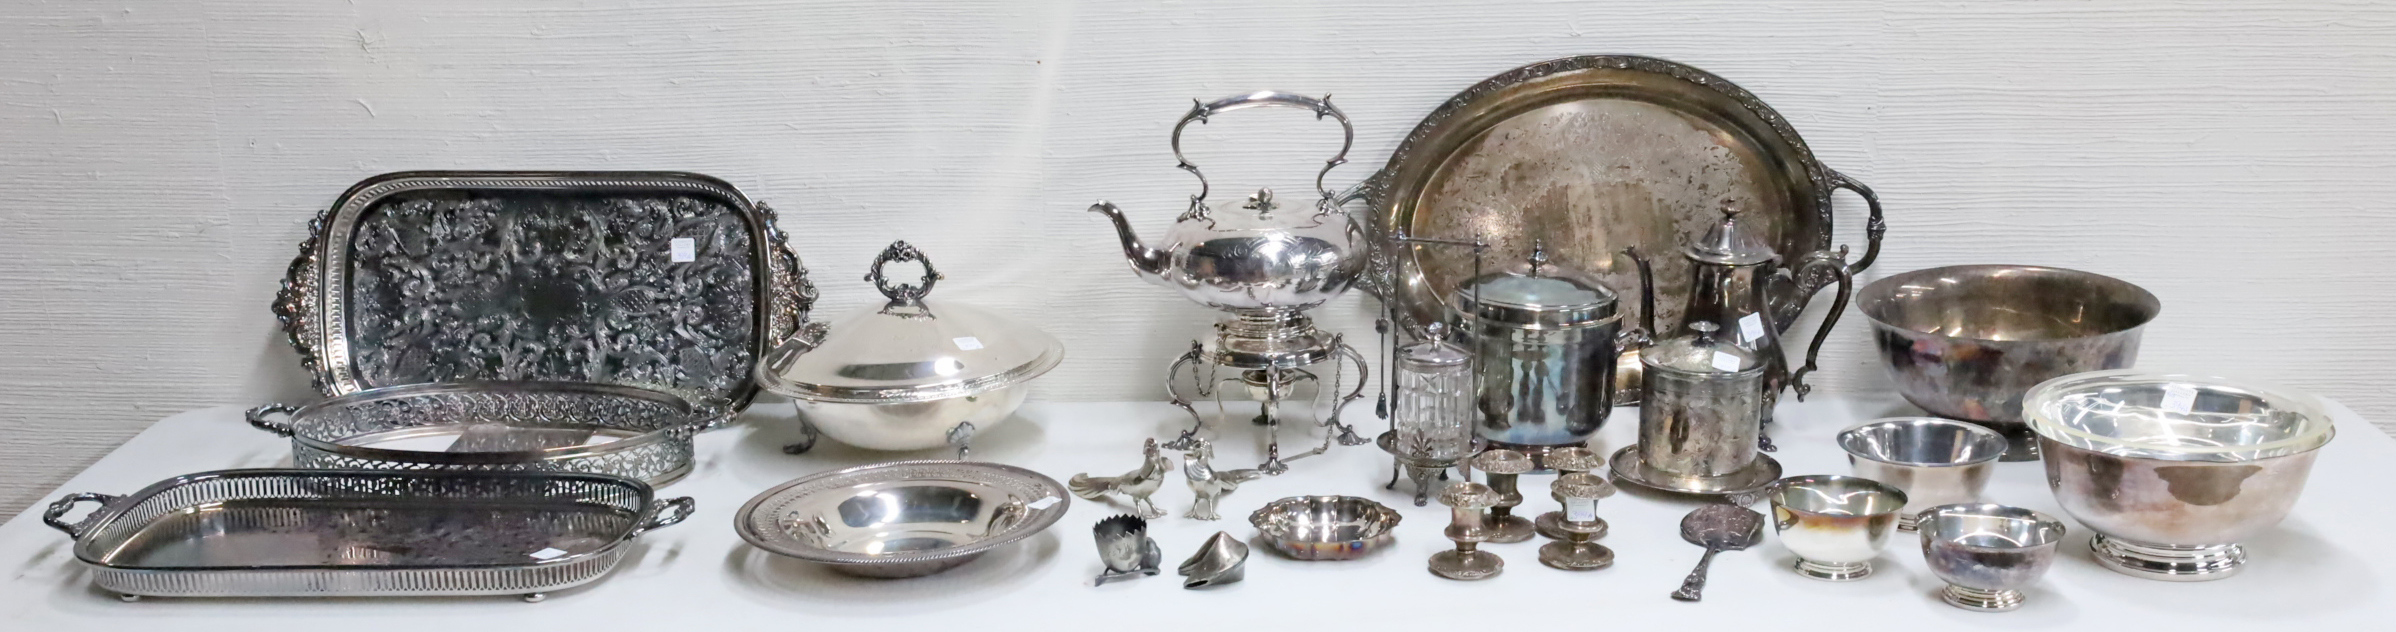 MISC TABLE LOT OF SILVER PLATE 2f912d